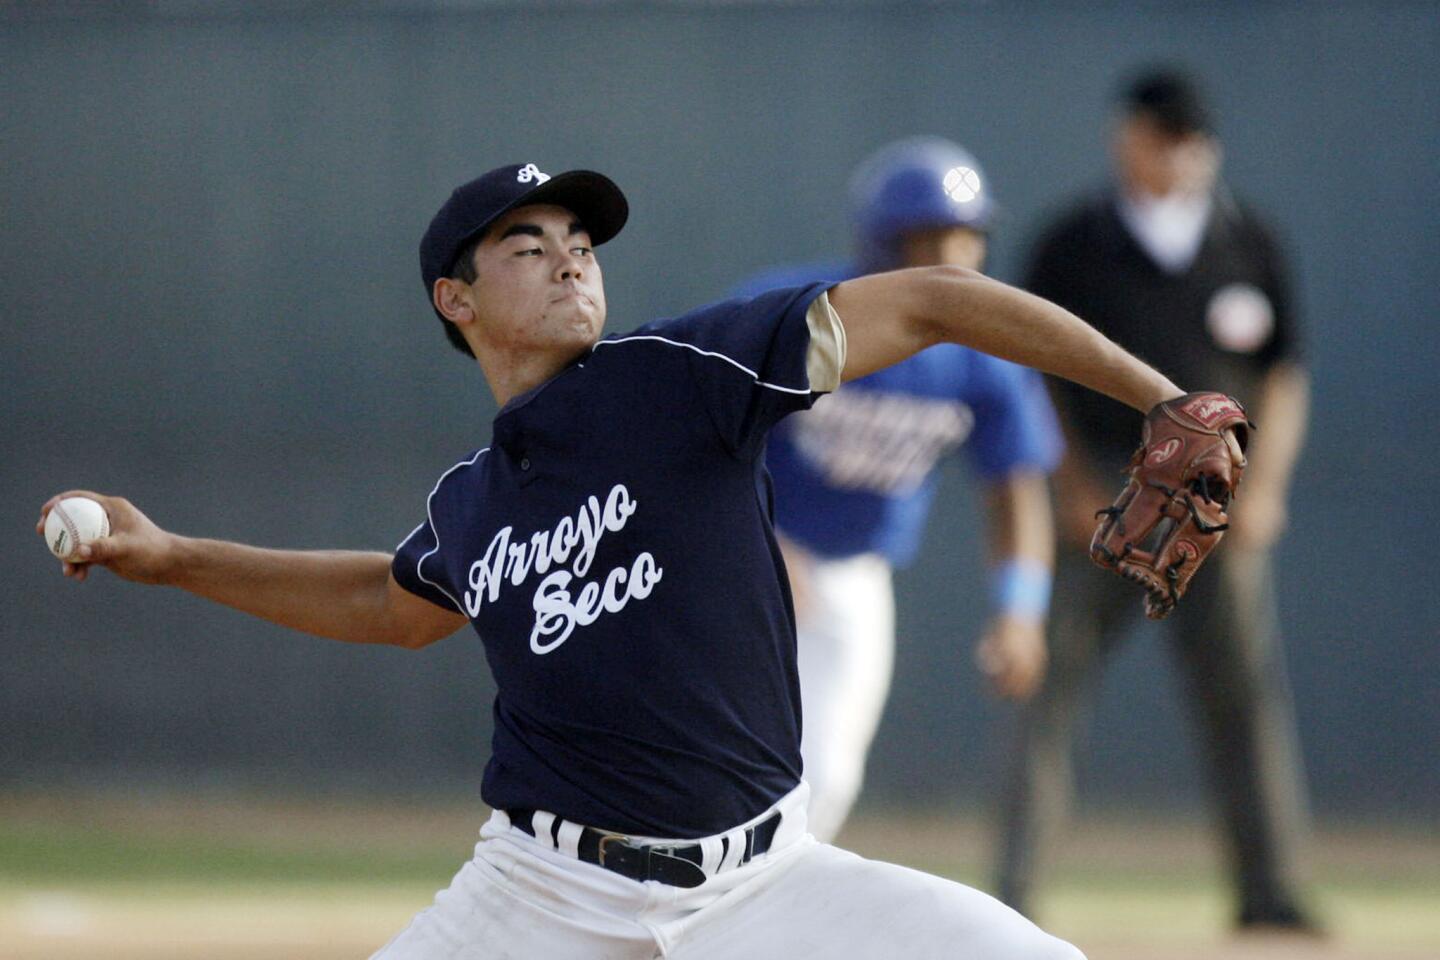 Arroyo Seco's Tei Vanderford pitches the ball during a game against Puerto Rico, which took place at Major League Baseball Urban Youth Academy in Compton on Thursday, August 3, 2012.